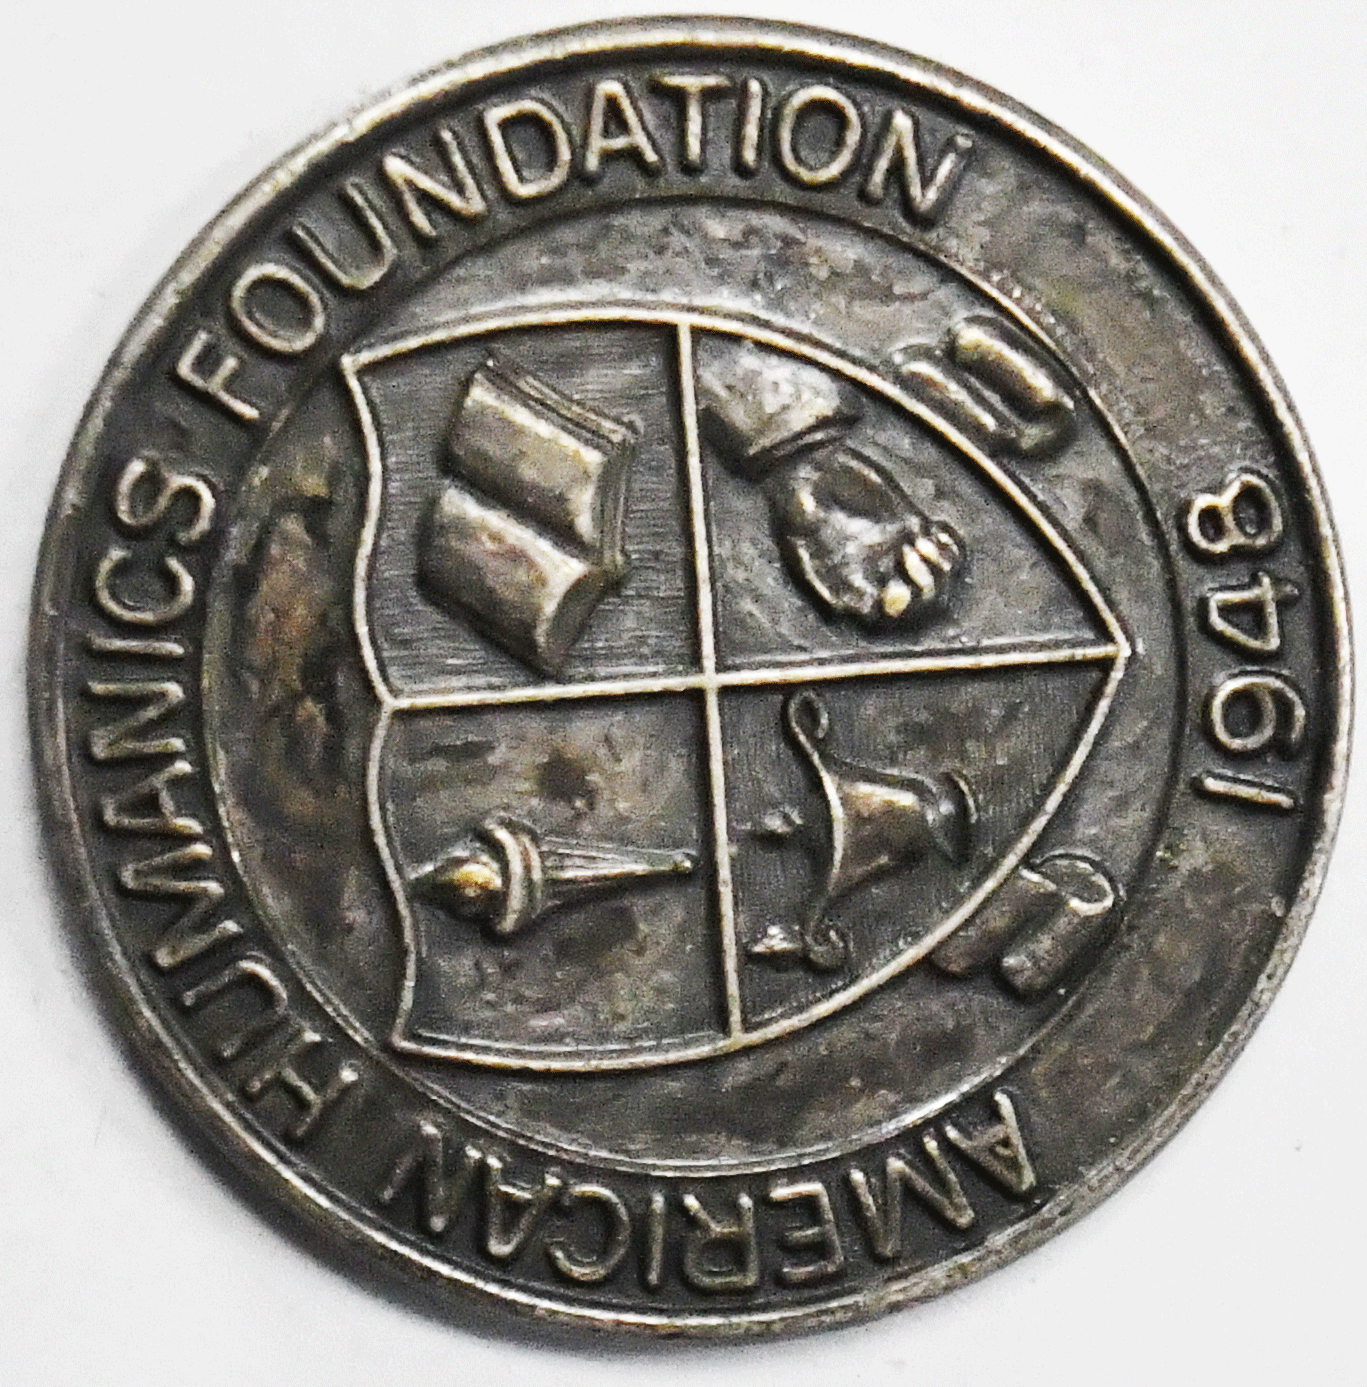 American Humanics Foundation 1948 Founders Banquet November 20 1965 Medal 32mm